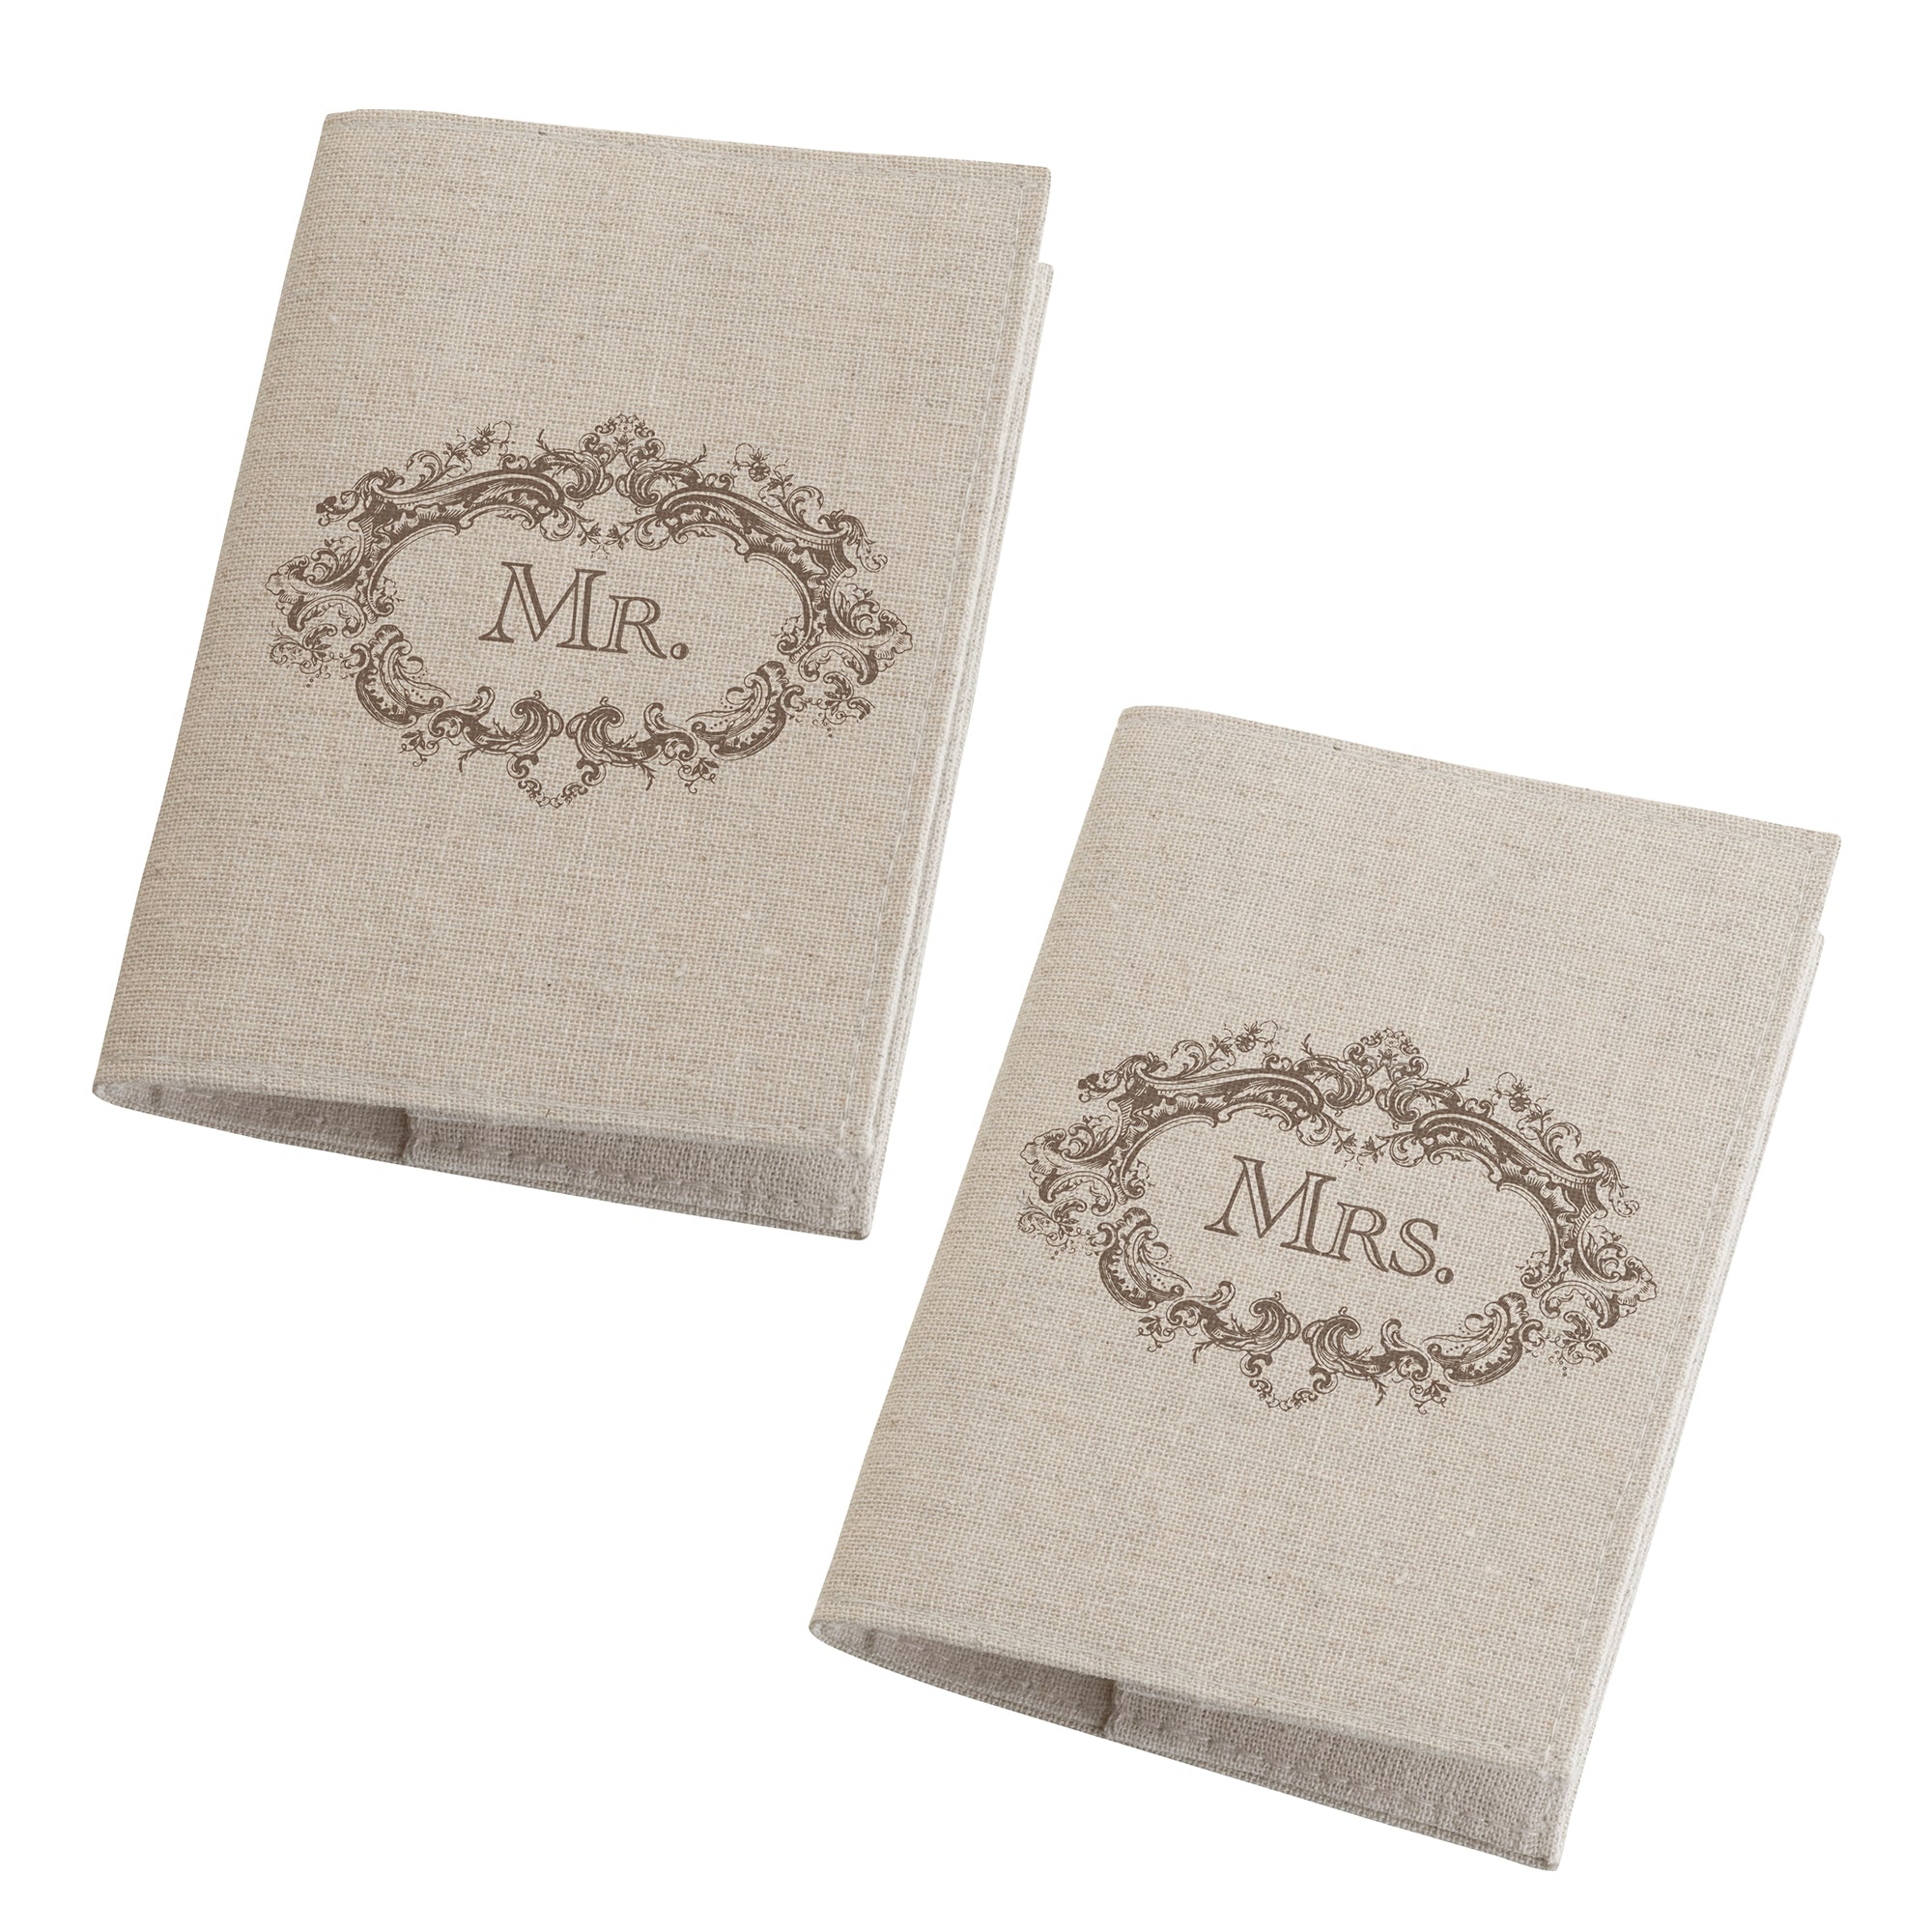 Mr. and Mrs. Tan Passport Covers